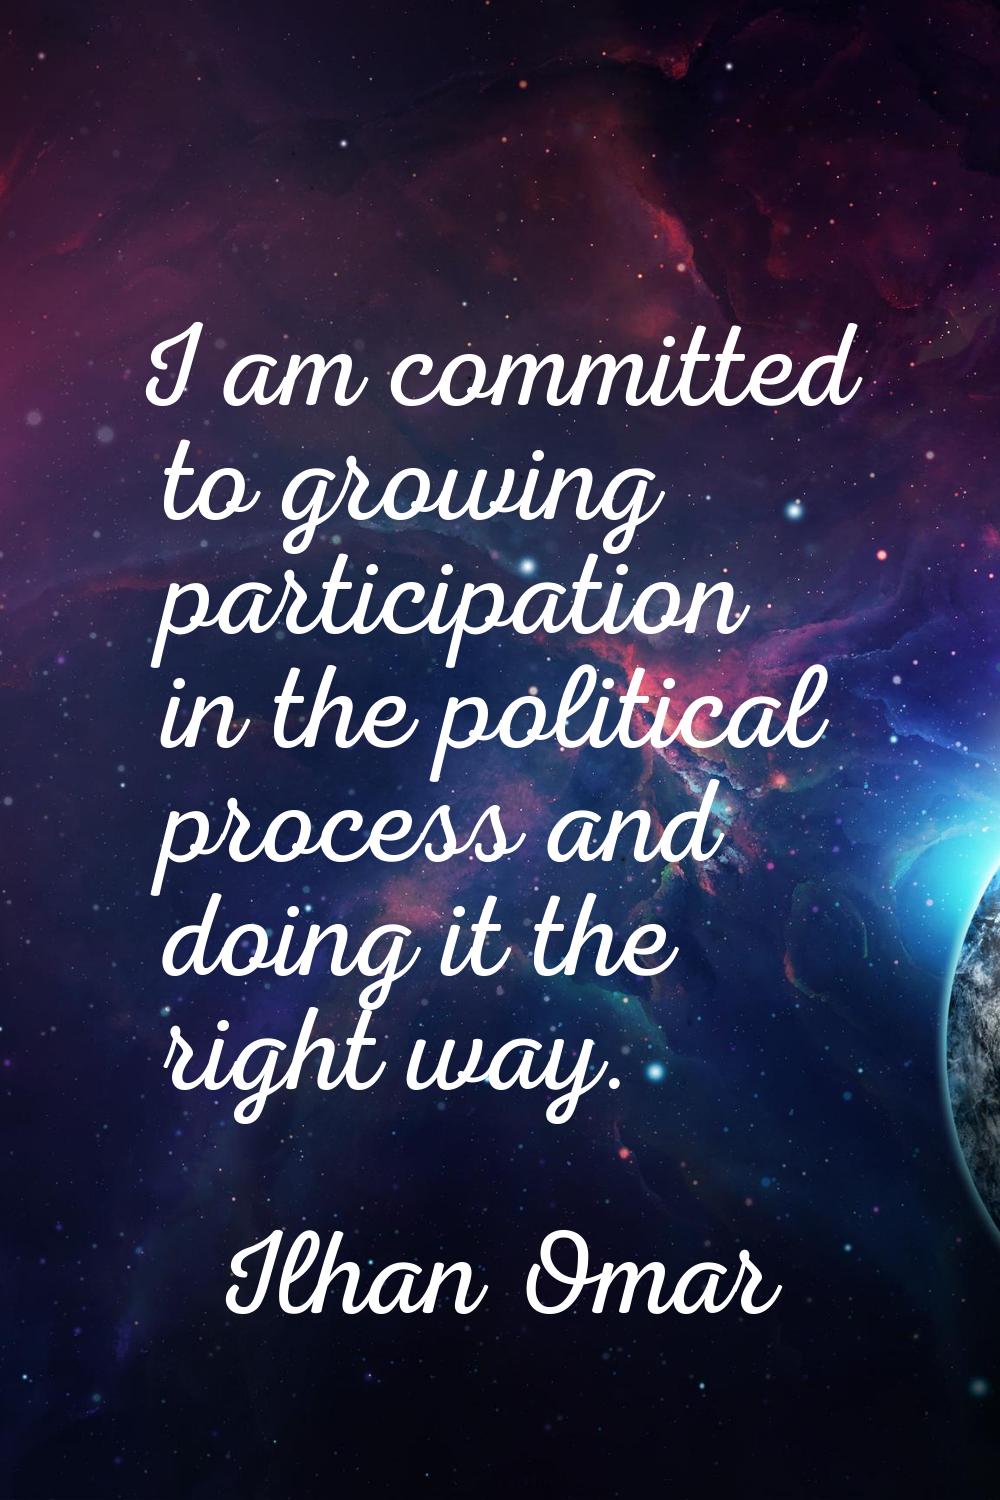 I am committed to growing participation in the political process and doing it the right way.